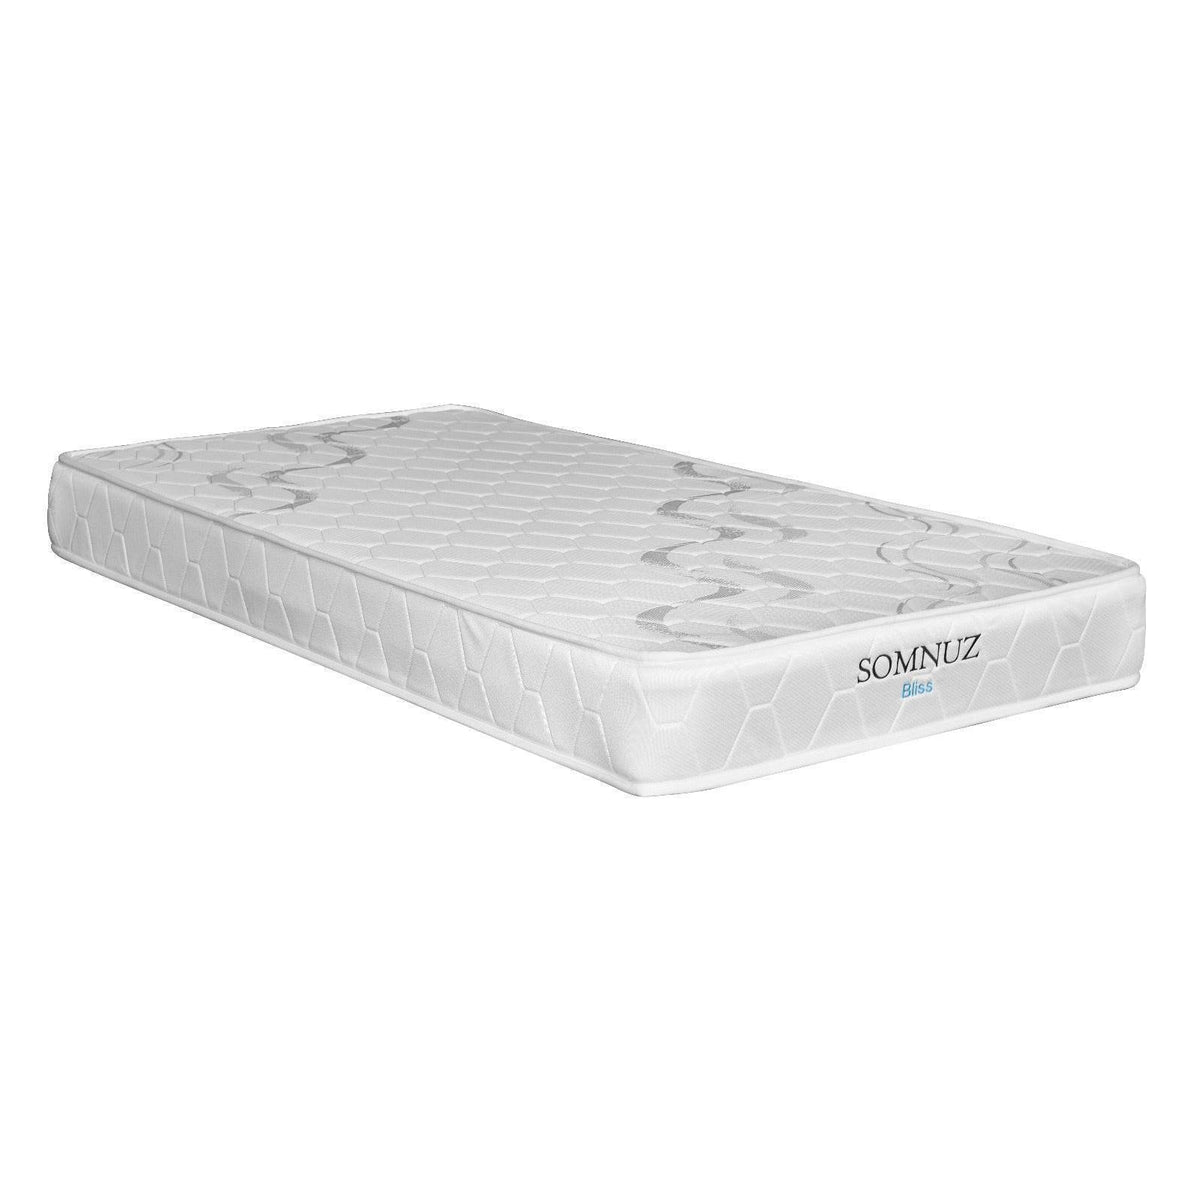 Zander Fabric 3 in 1 Pull Out Bed (Water Repellent) + Somnuz™ Bliss Spring Mattress Bed Set Singapore